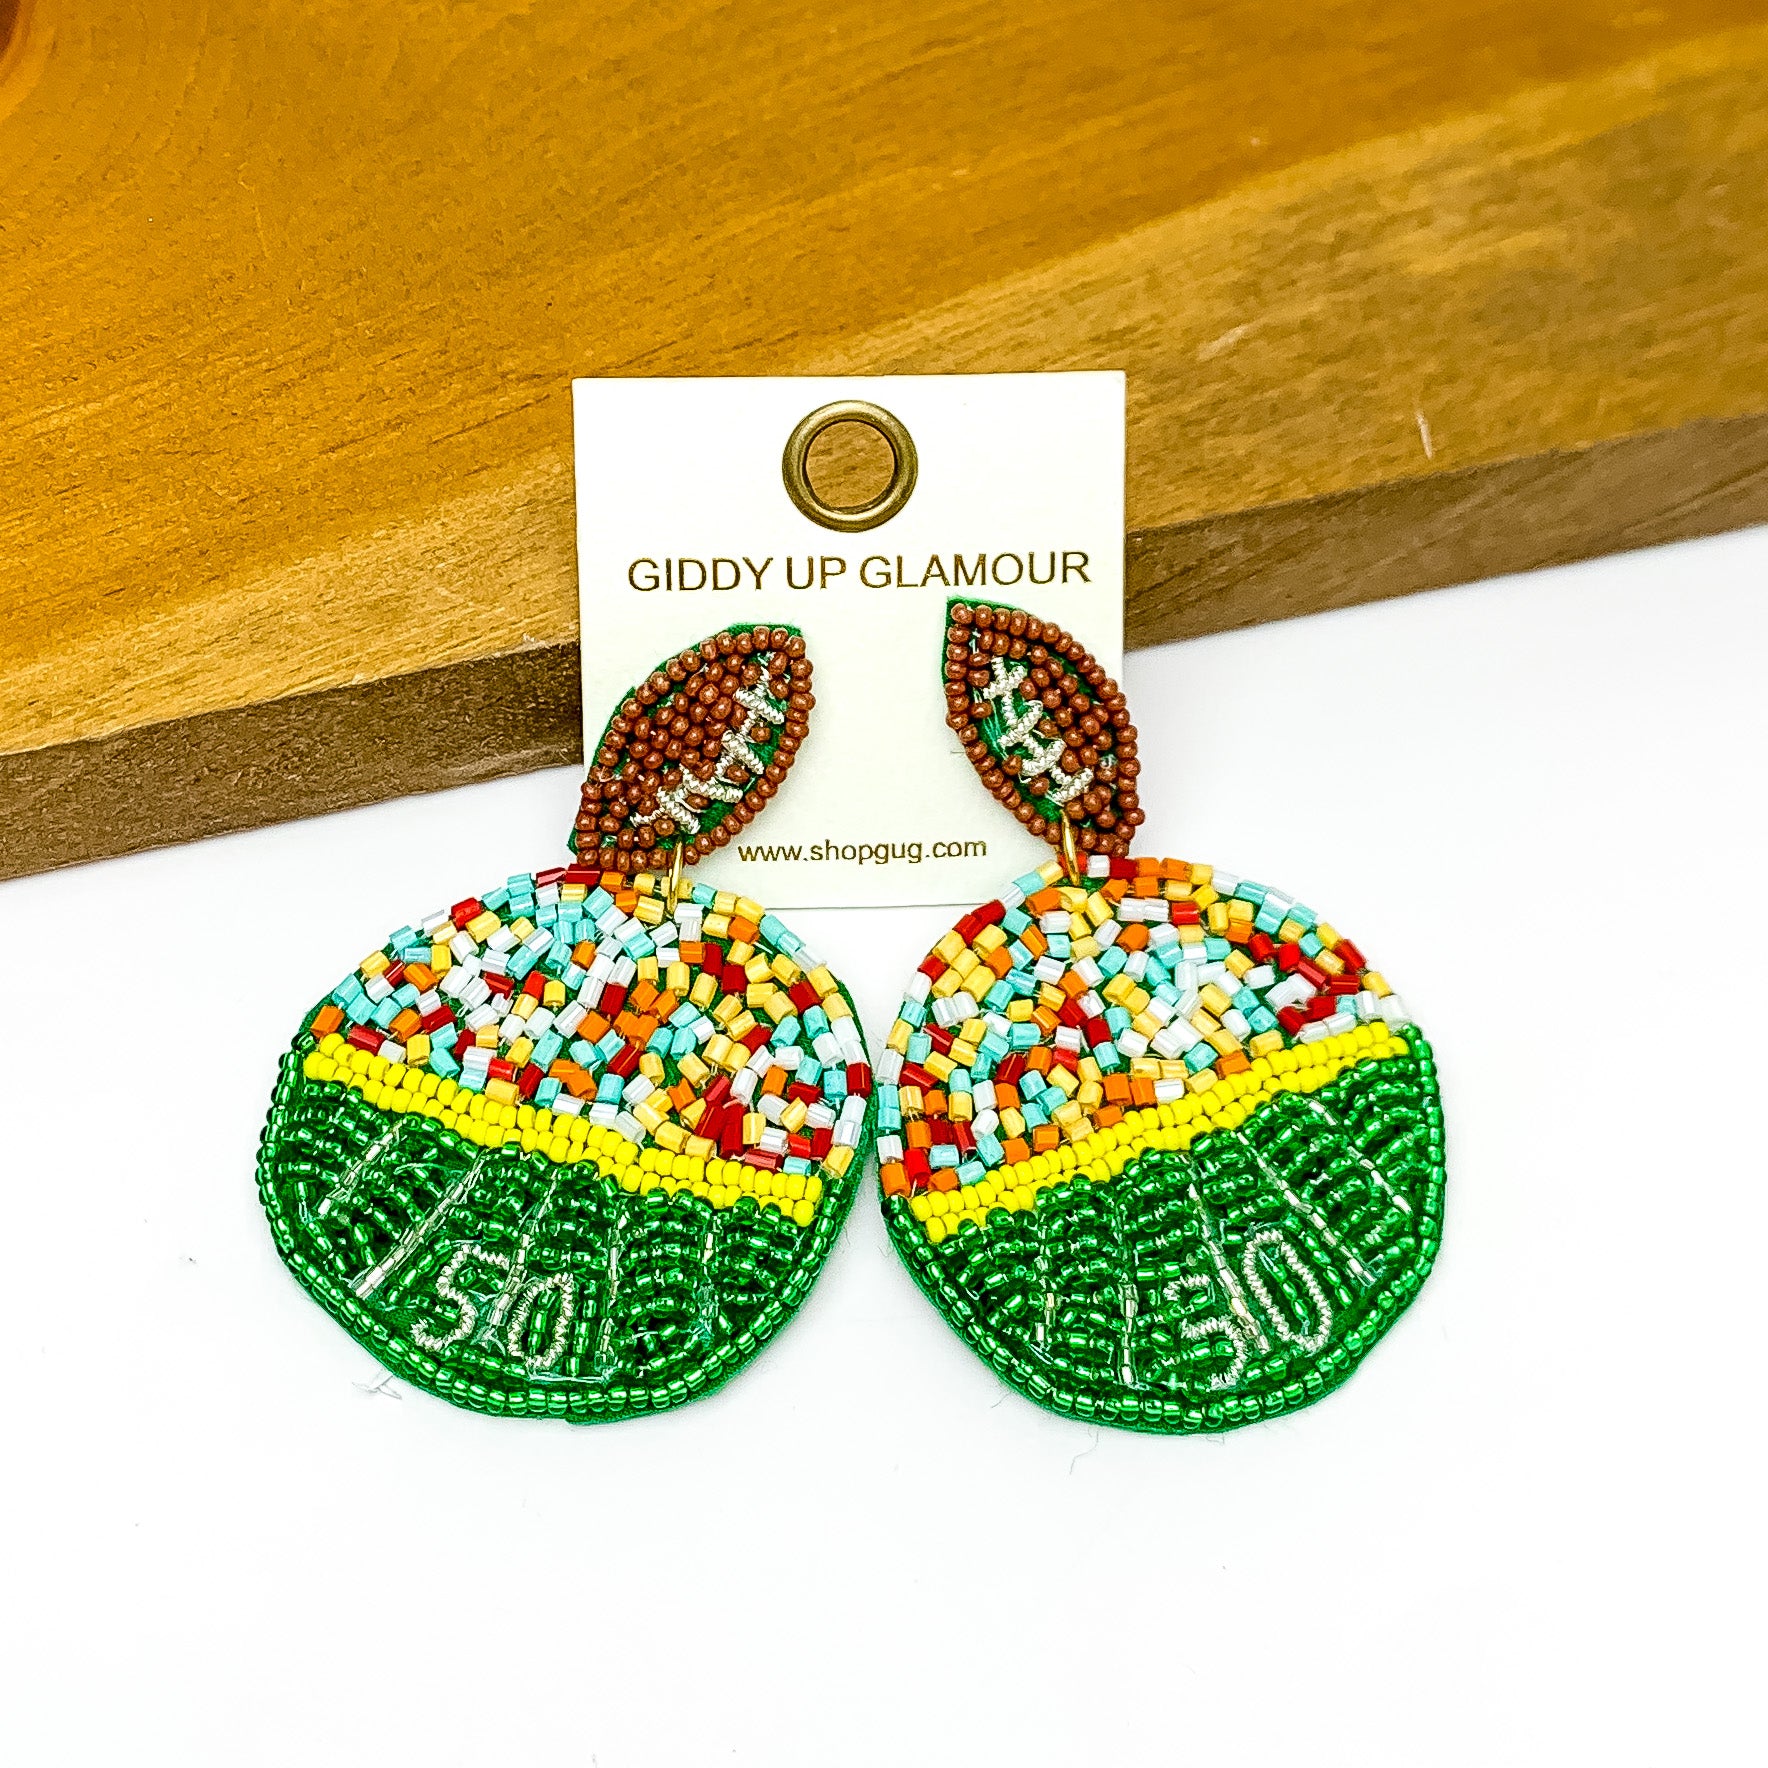 Football Stadium Circular Post Beaded Earrings in Multicolor. Pictured against a wood piece with a white background.